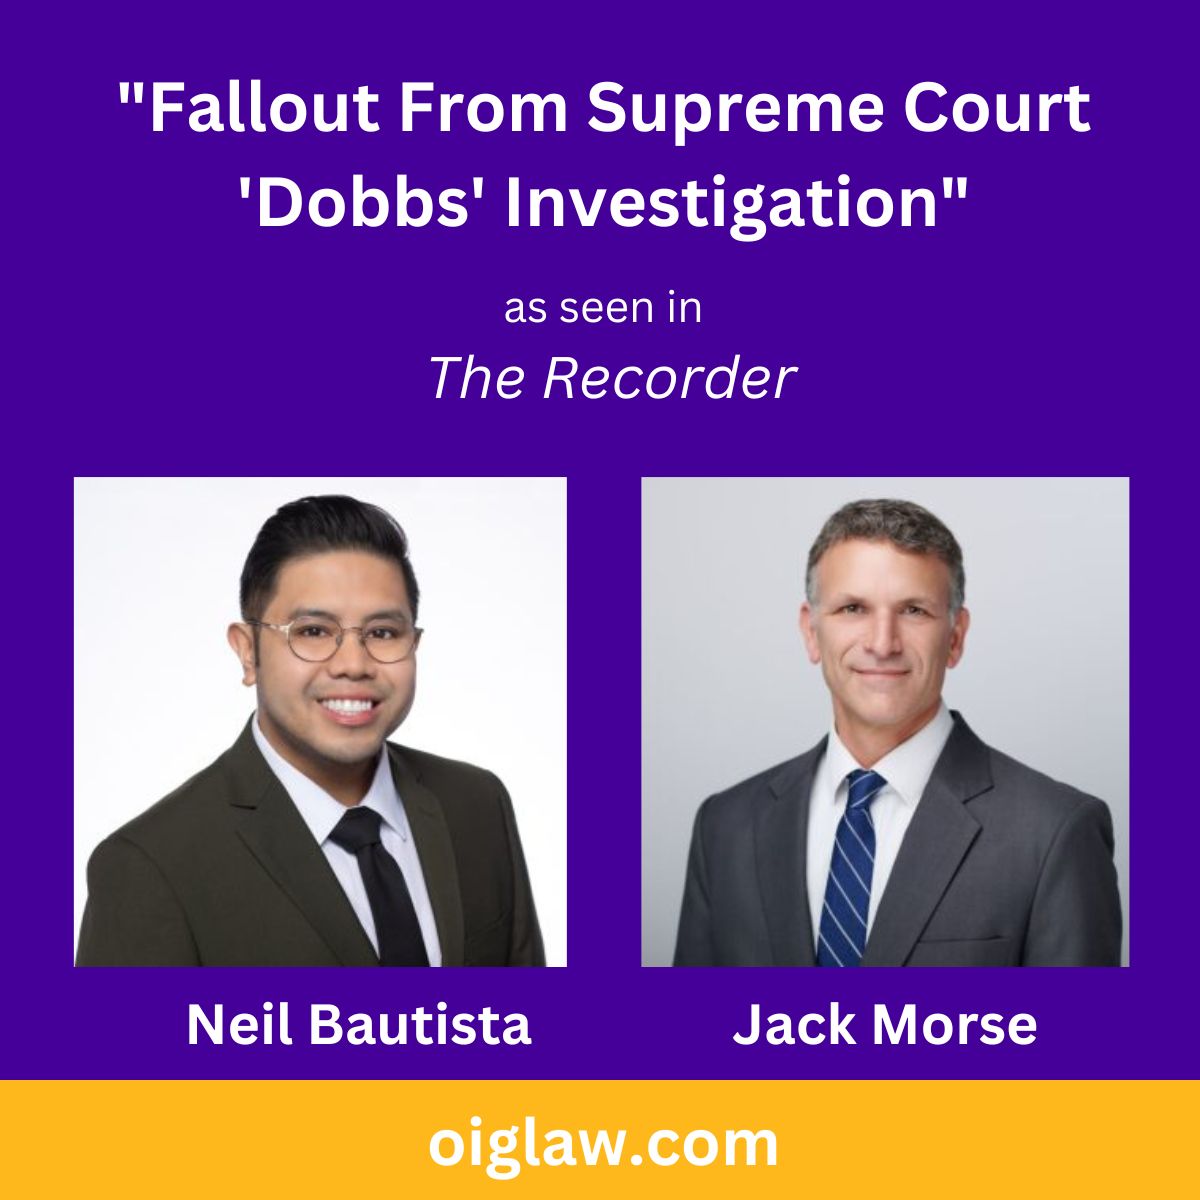 "Fallout From Supreme Court 'Dobbs' Investigation" as seen in The Recorder with authors Neil Bautista and Jack Morse